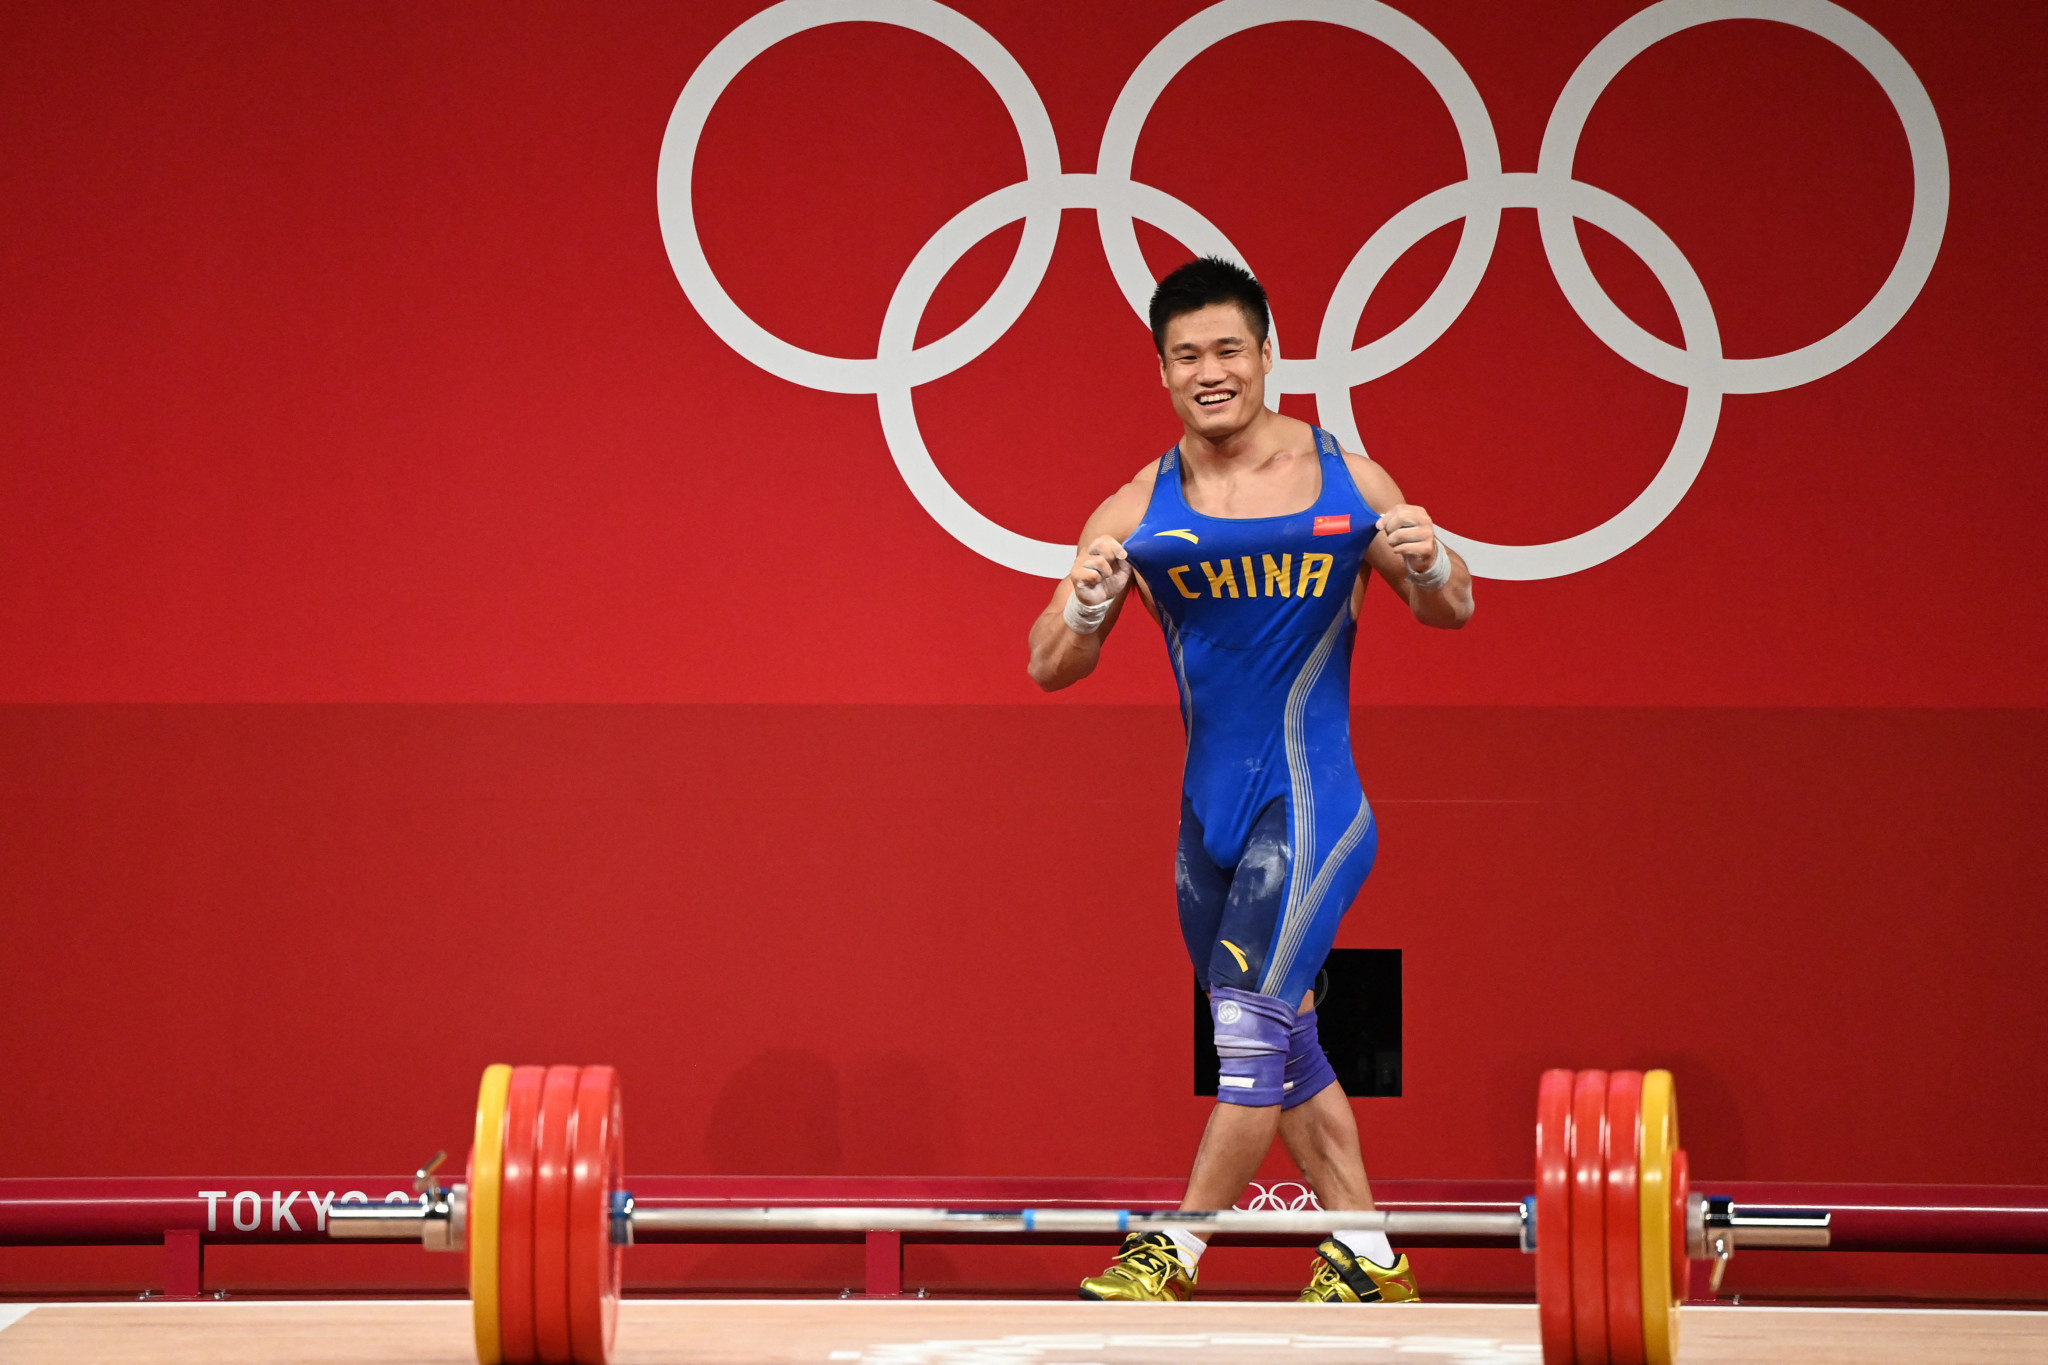 China's Lyu Xiaojun celebrates after winning the men's 81kg weightlifting gold at Tokyo 2020 ©Getty Images